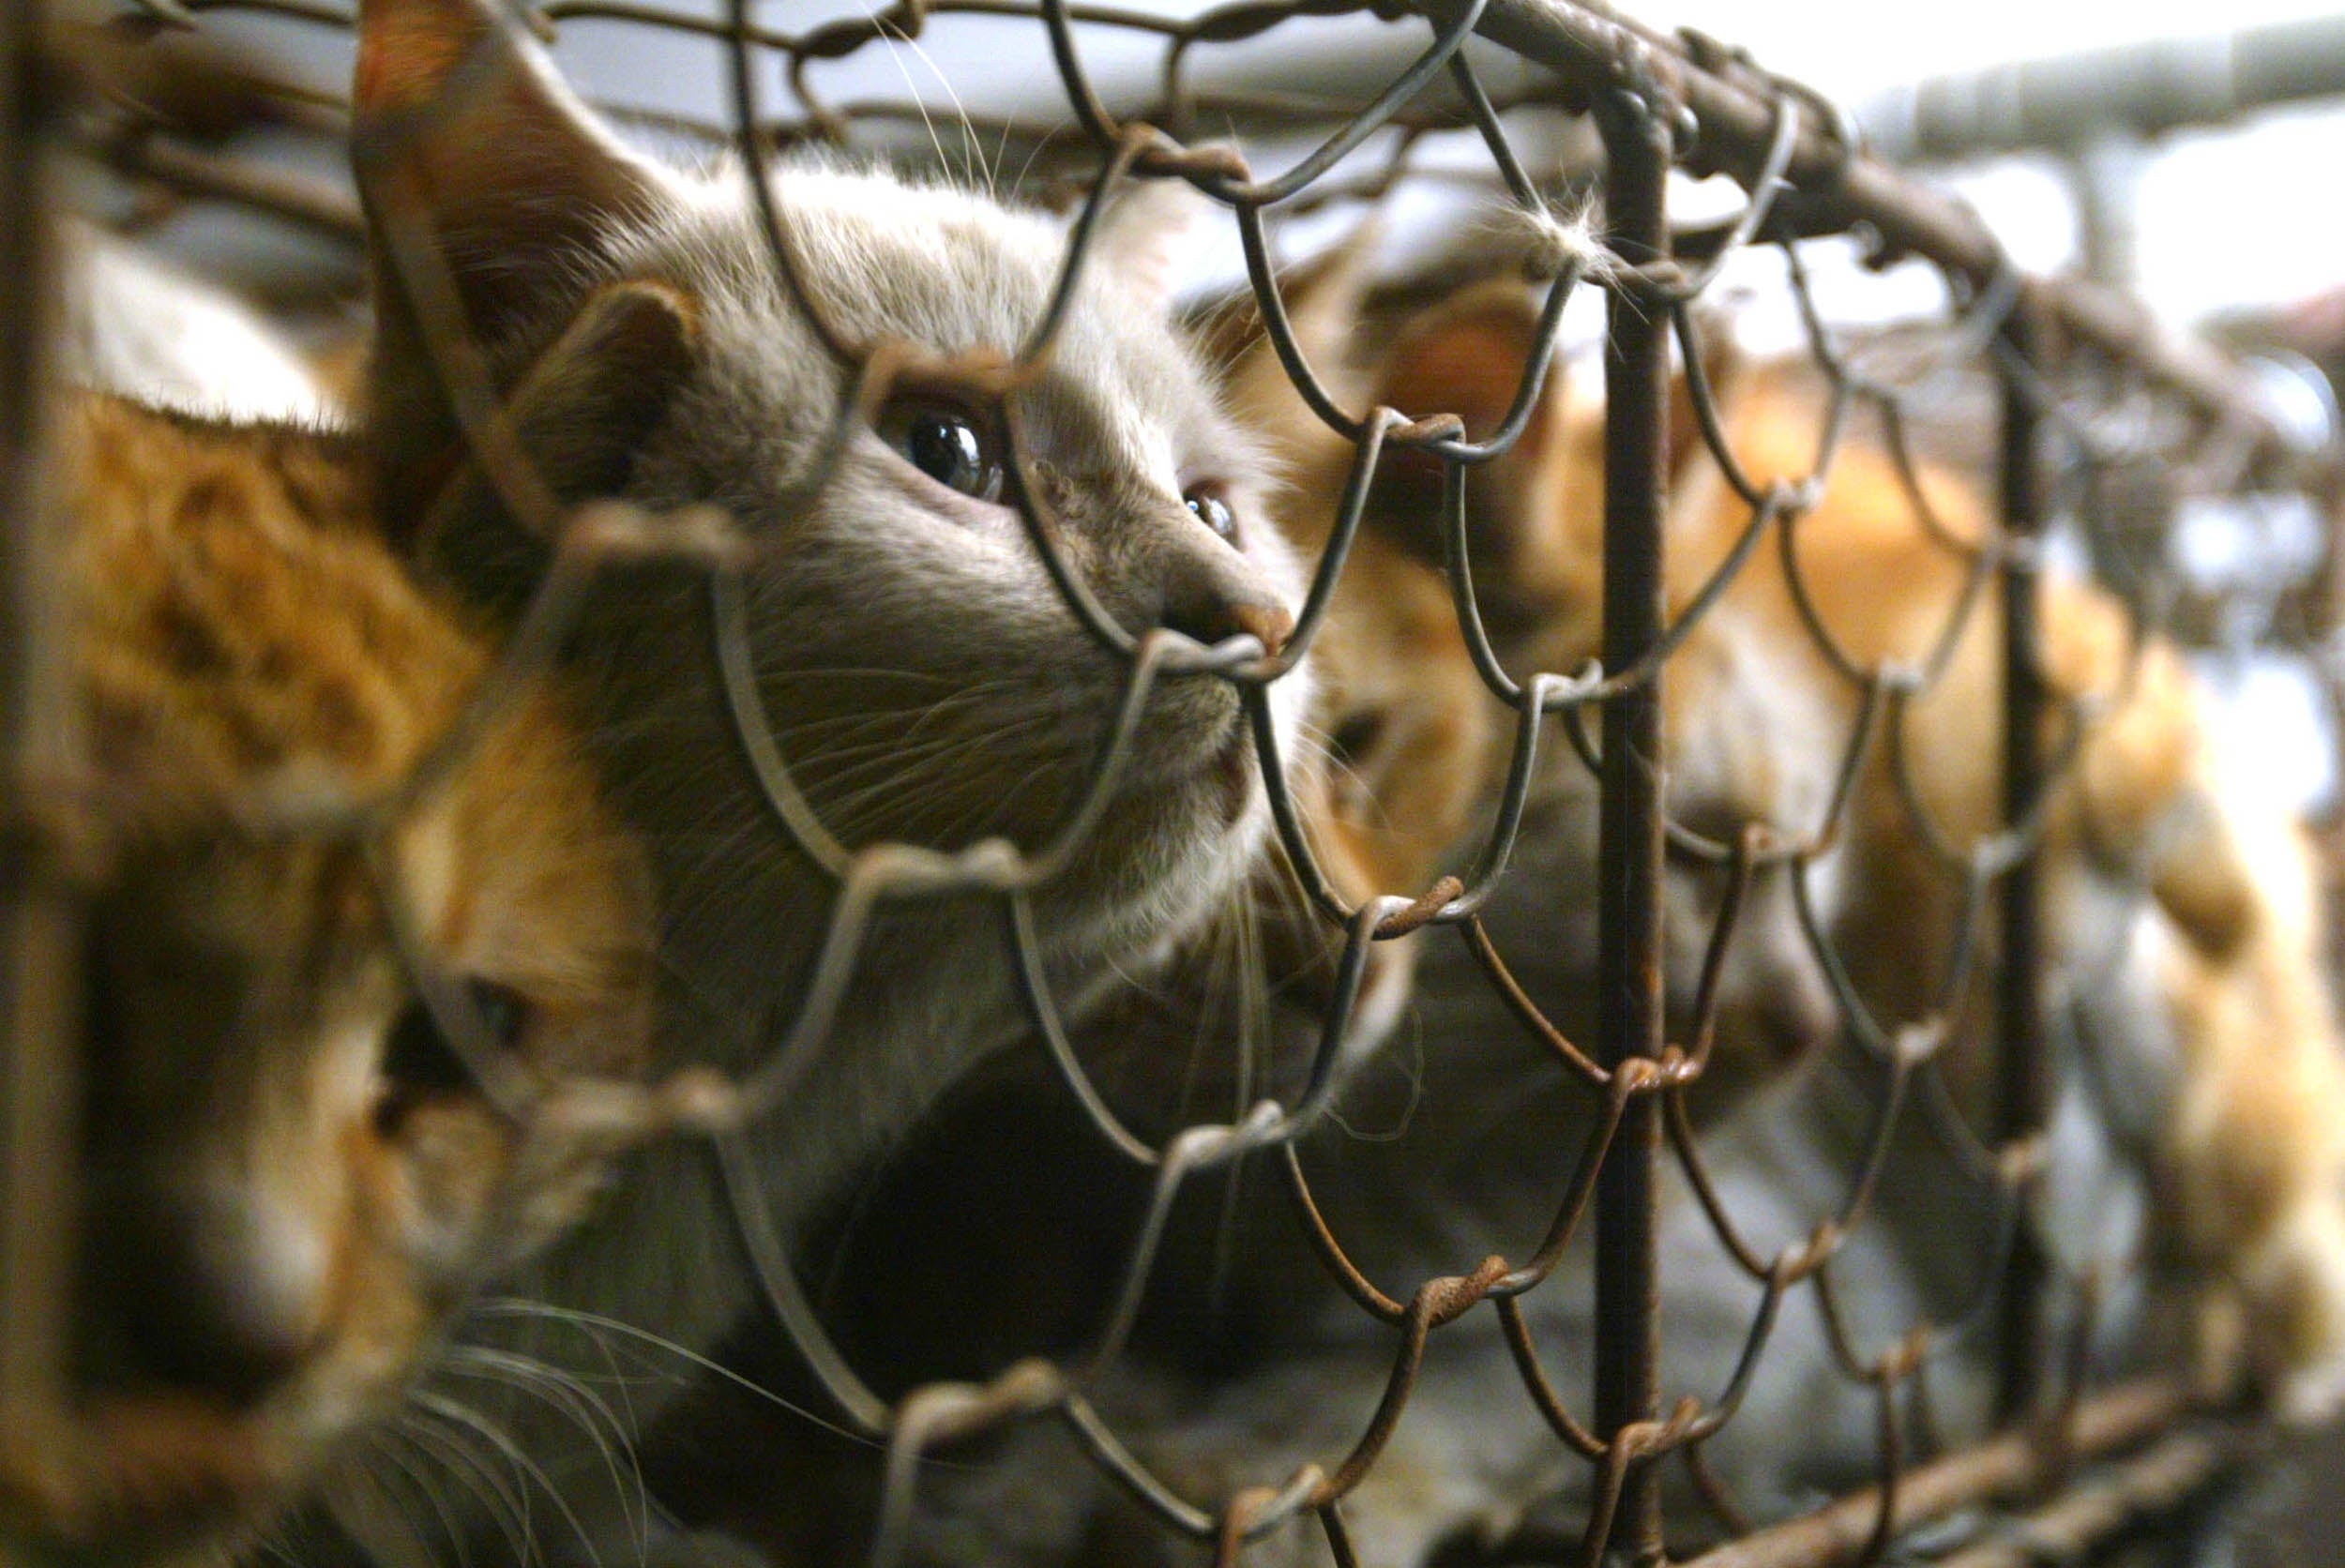 File: Cats are seen caged after being rescued from a Tianjin market in China